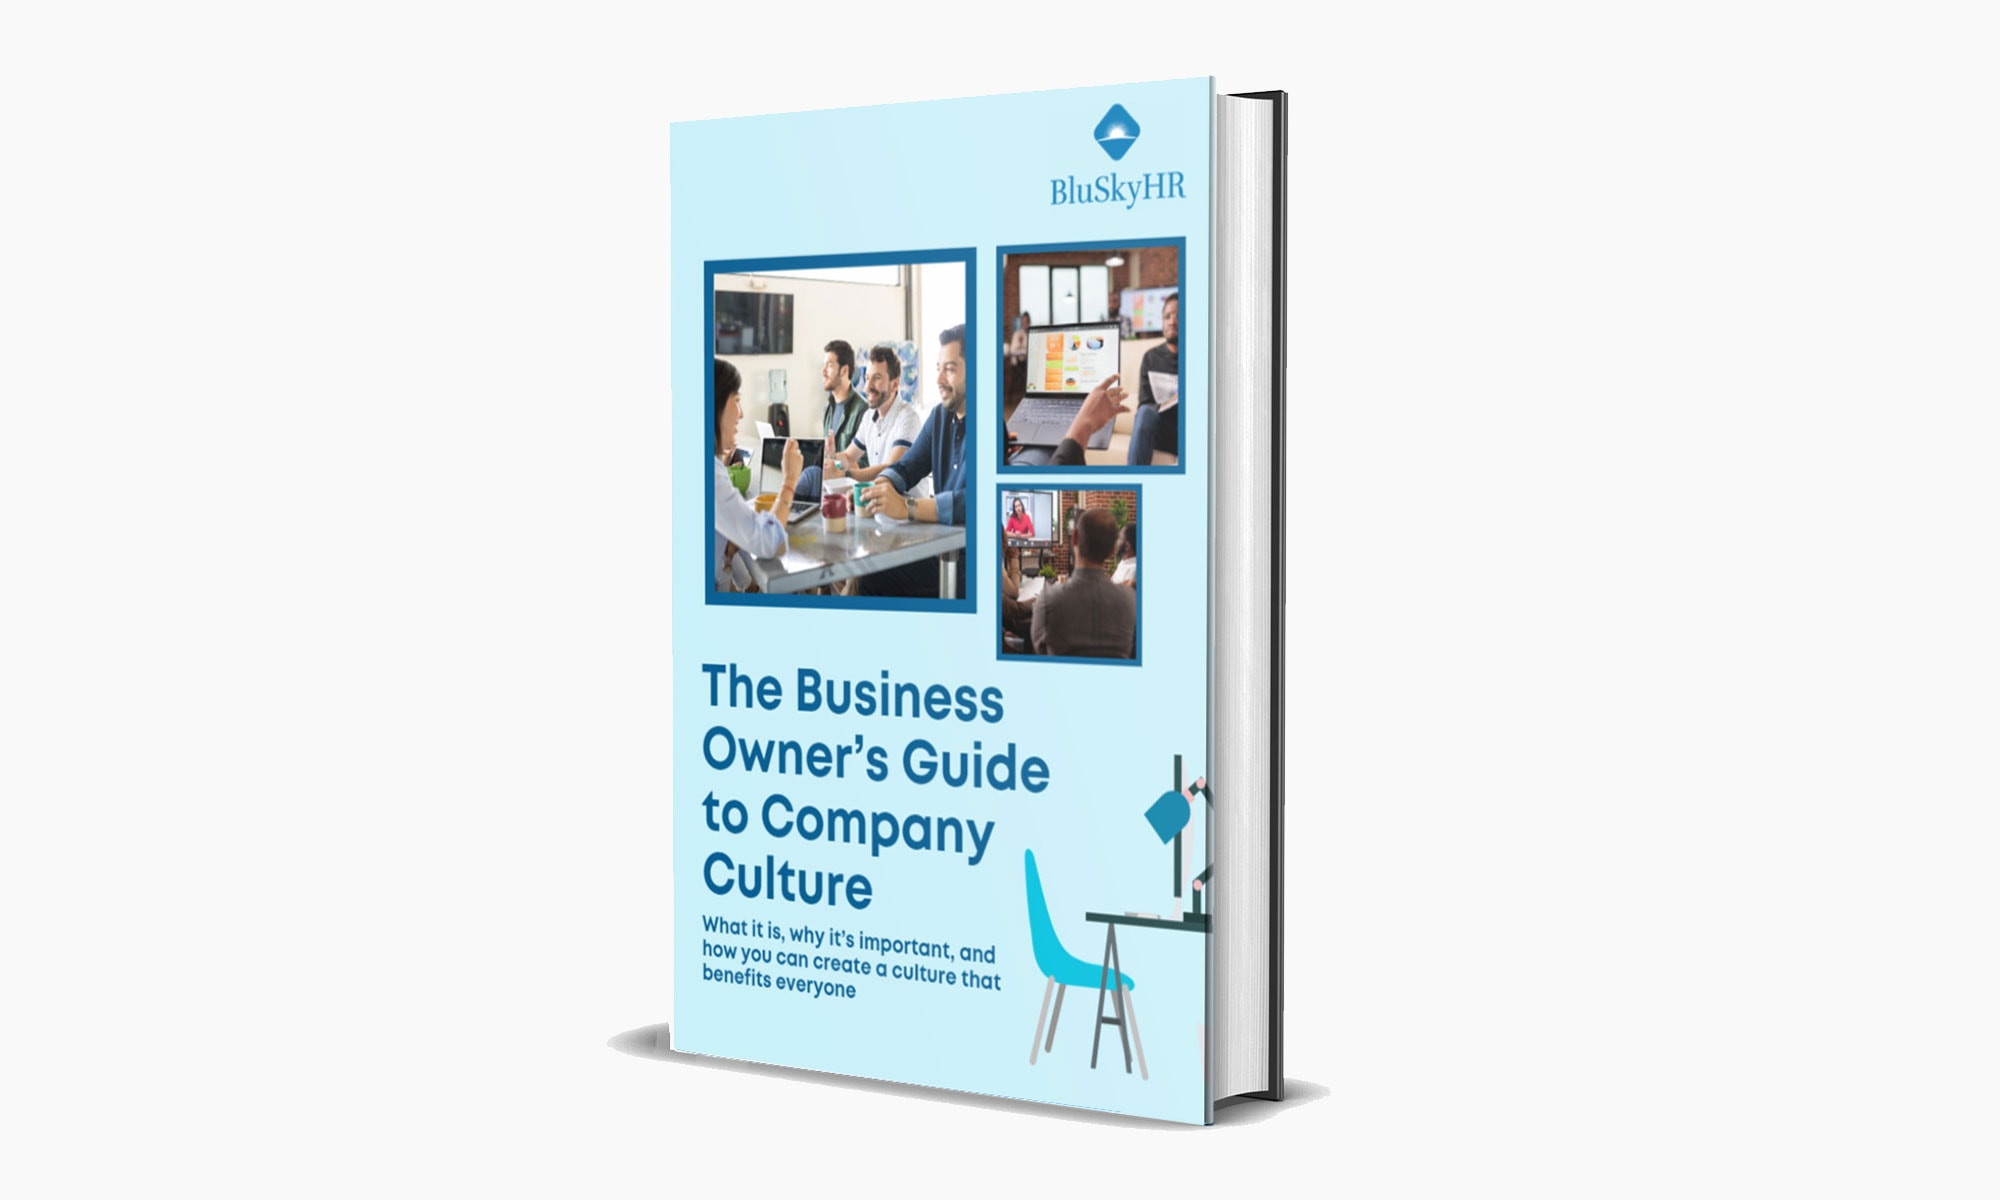 The Business Owner’s Guide to Company Culture